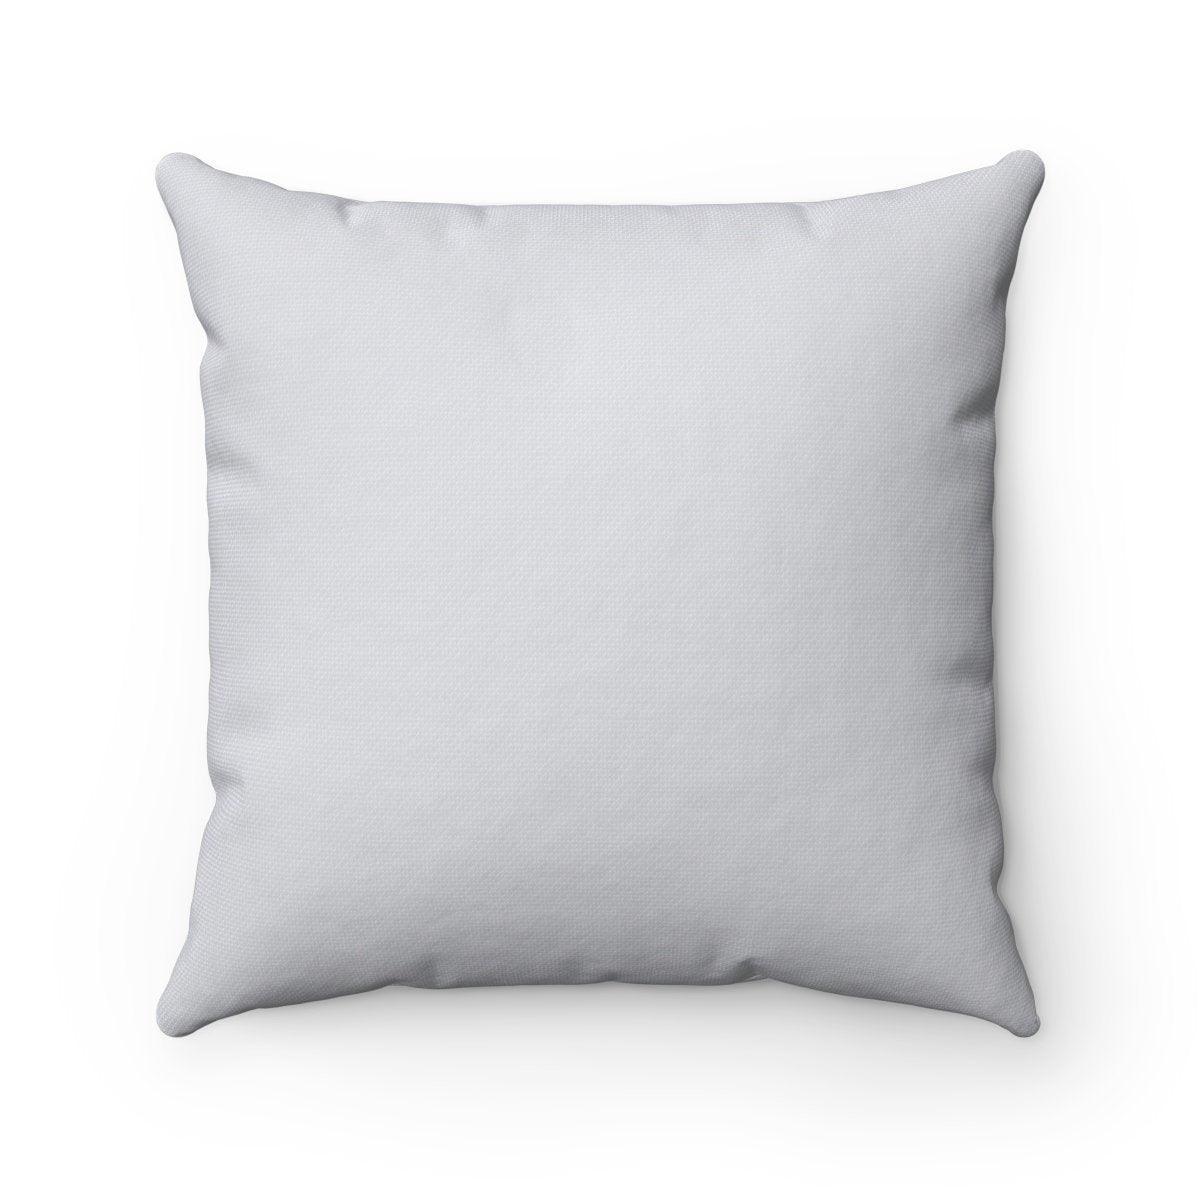 Light Gray Cat Pillow Featuring a Woman and a Gray Tabby Cat Printed on the Front